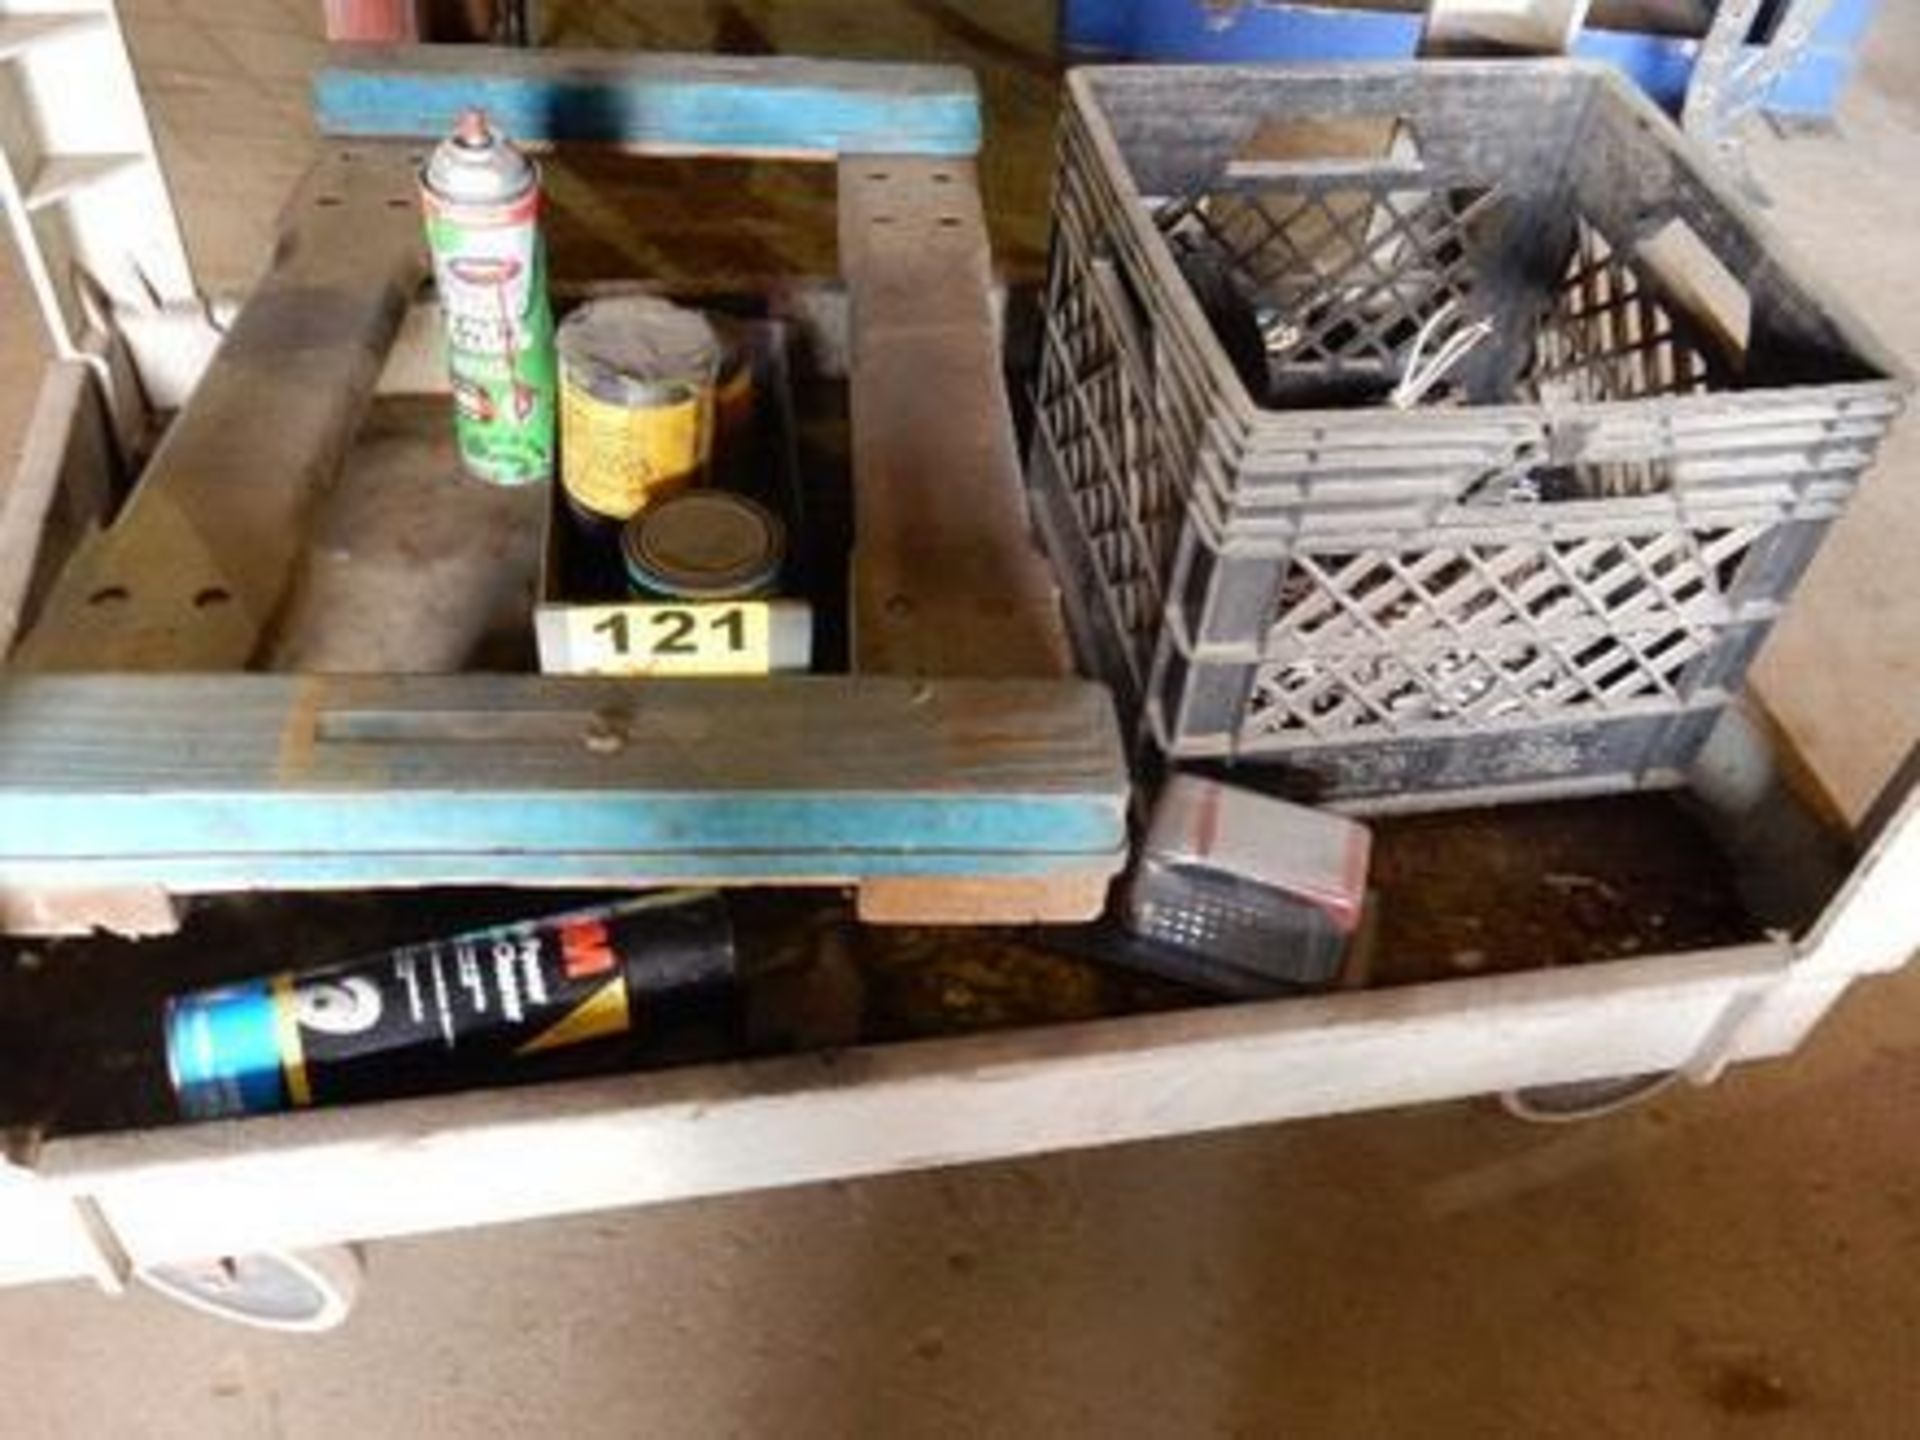 Industrial Strength Plastic 2 Tray Shelf Service & Utility Cart contents is included. - Image 3 of 3